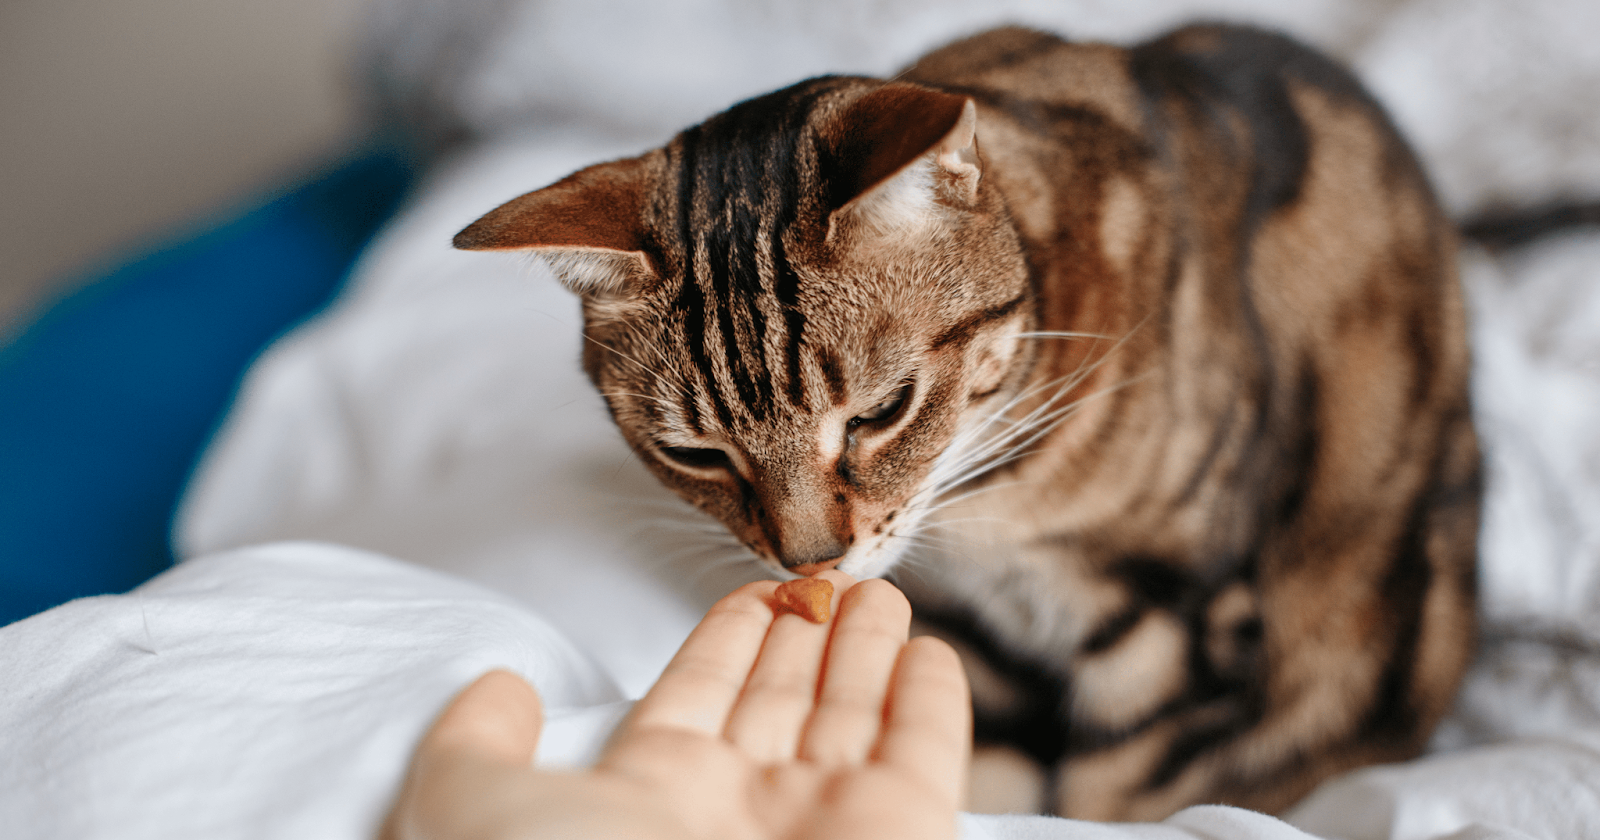 Cat smelling treat being given by hand